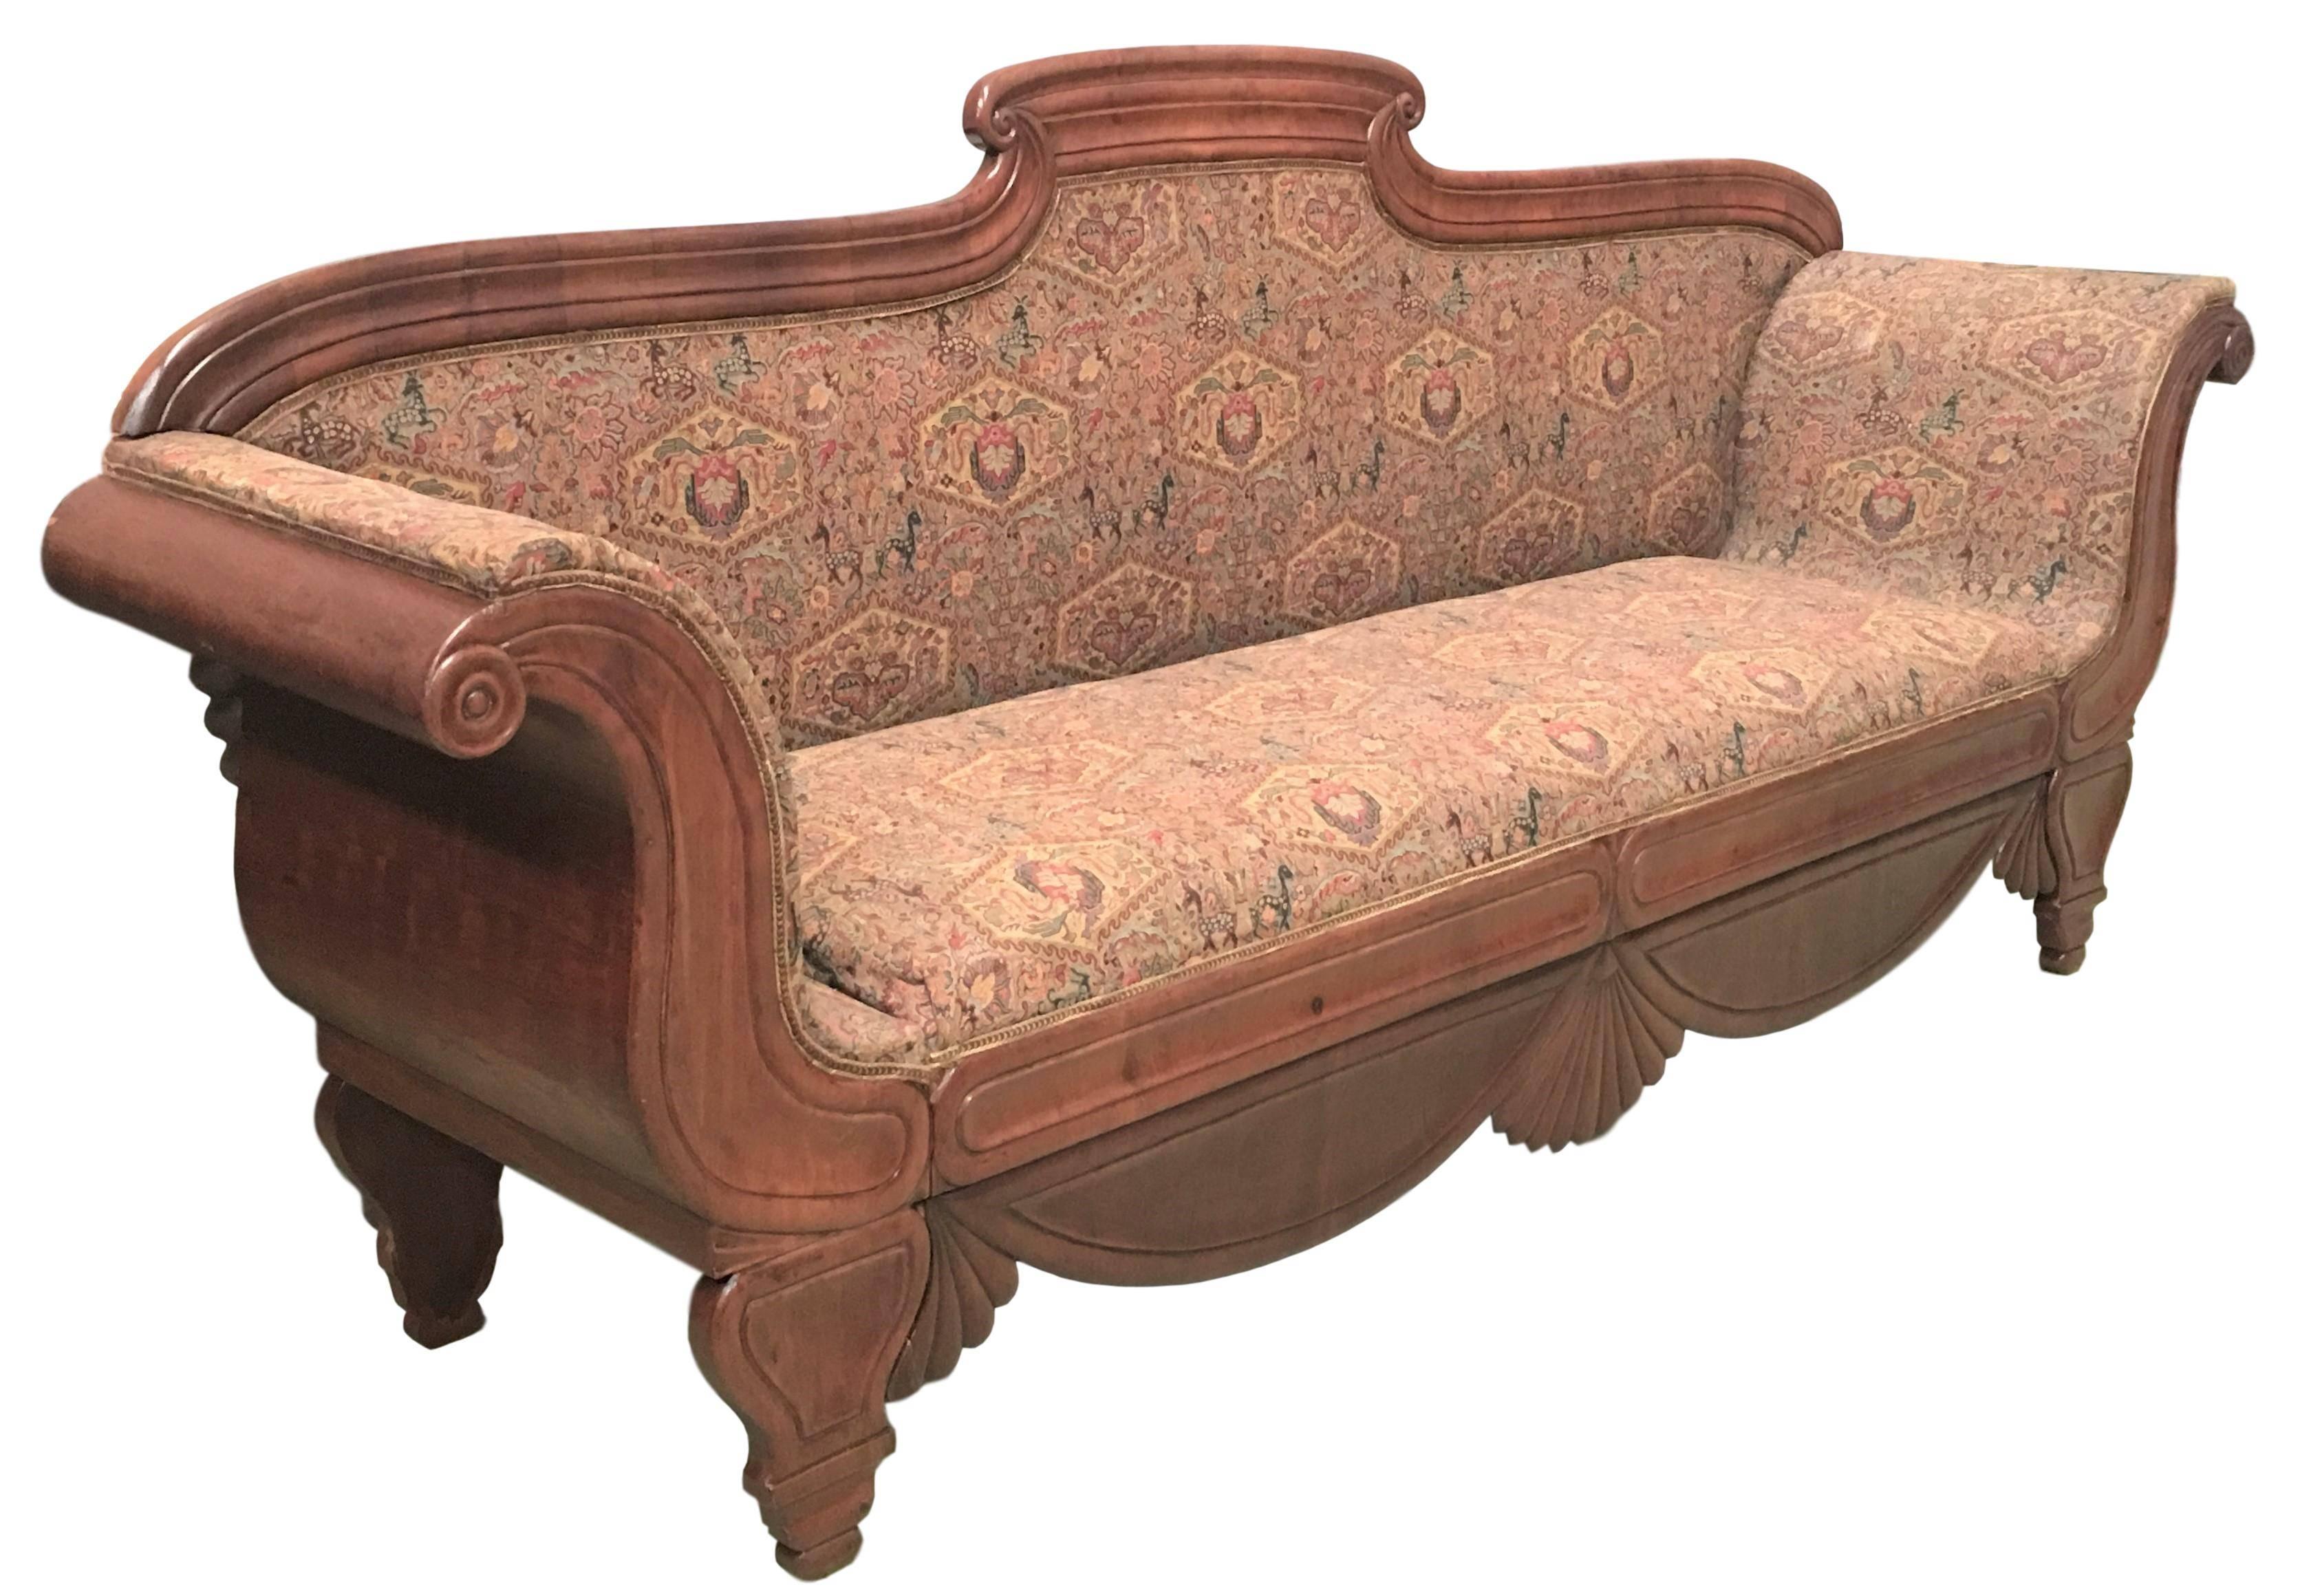 19th century French carved walnut bench, sofa, daybed upholstered in original damask
Large and very elegant, with beautiful carved
Resistant and restored

Extra measurements:
Seat wide inside 70.86in
Seat deep inside 19.29in.